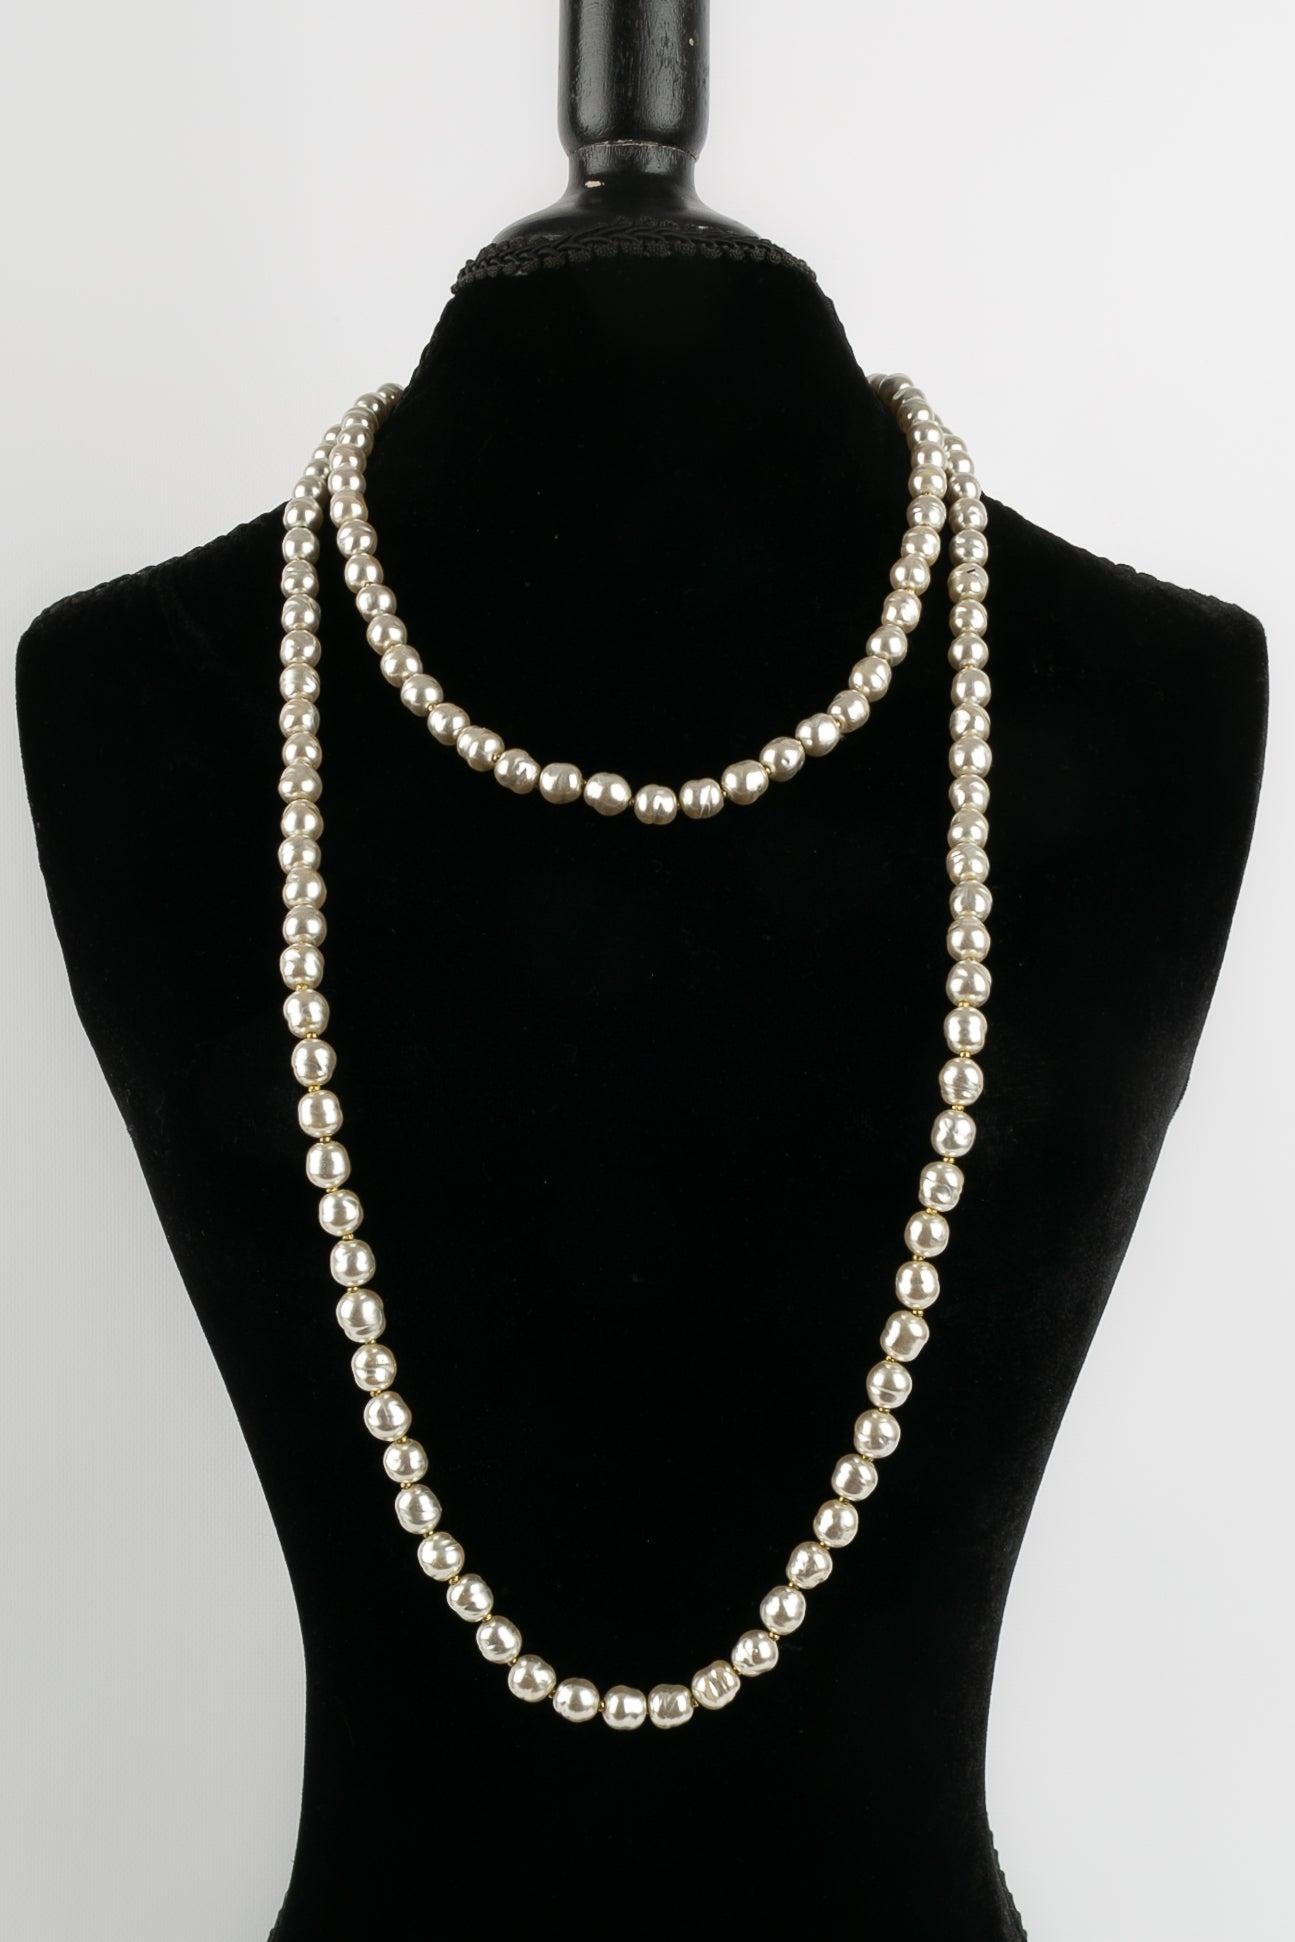 Chanel - Pearly pearl necklace in shades of light gray. Collection 1981.

Additional information: 
Dimensions: Length: 157 cm
Condition: Very good condition
Seller Ref number: CB106